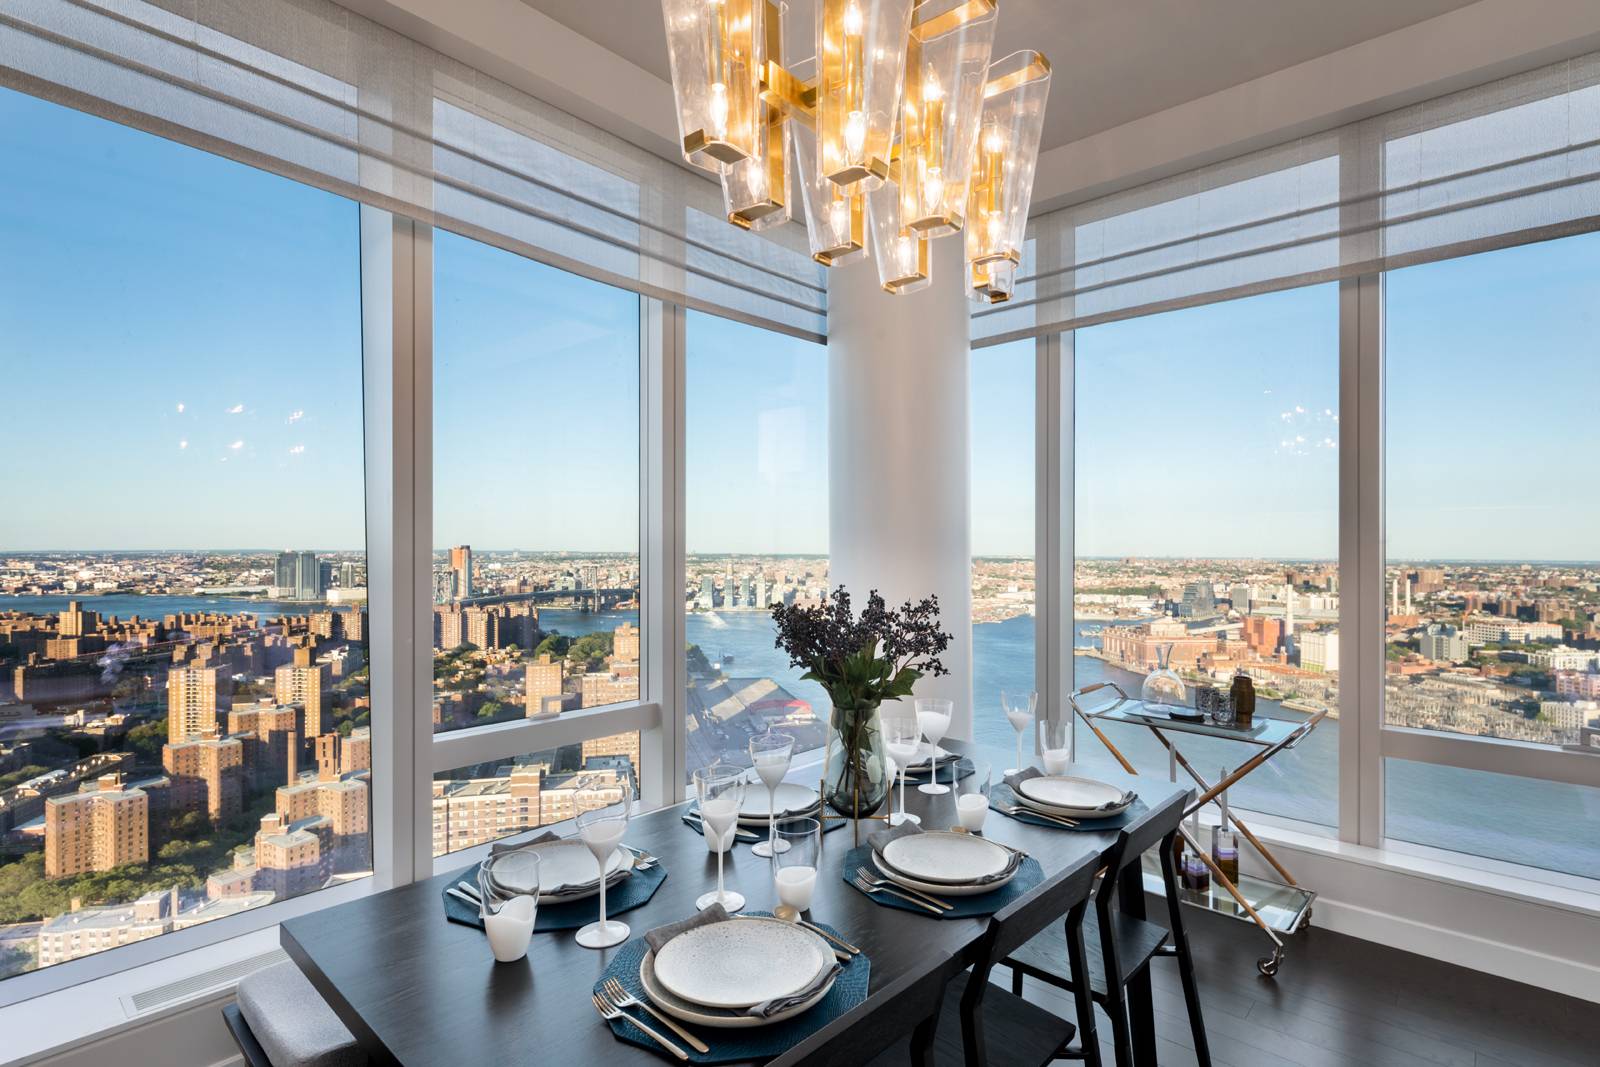 ONE MANHATTAN SQUARE OFFERS ONE OF THE LAST 20 YEAR TAX ABATEMENTS AVAILABLE IN NEW YORK CITY Residence 64F is a 1163 square foot two bedroom, two bathroom, with an ...